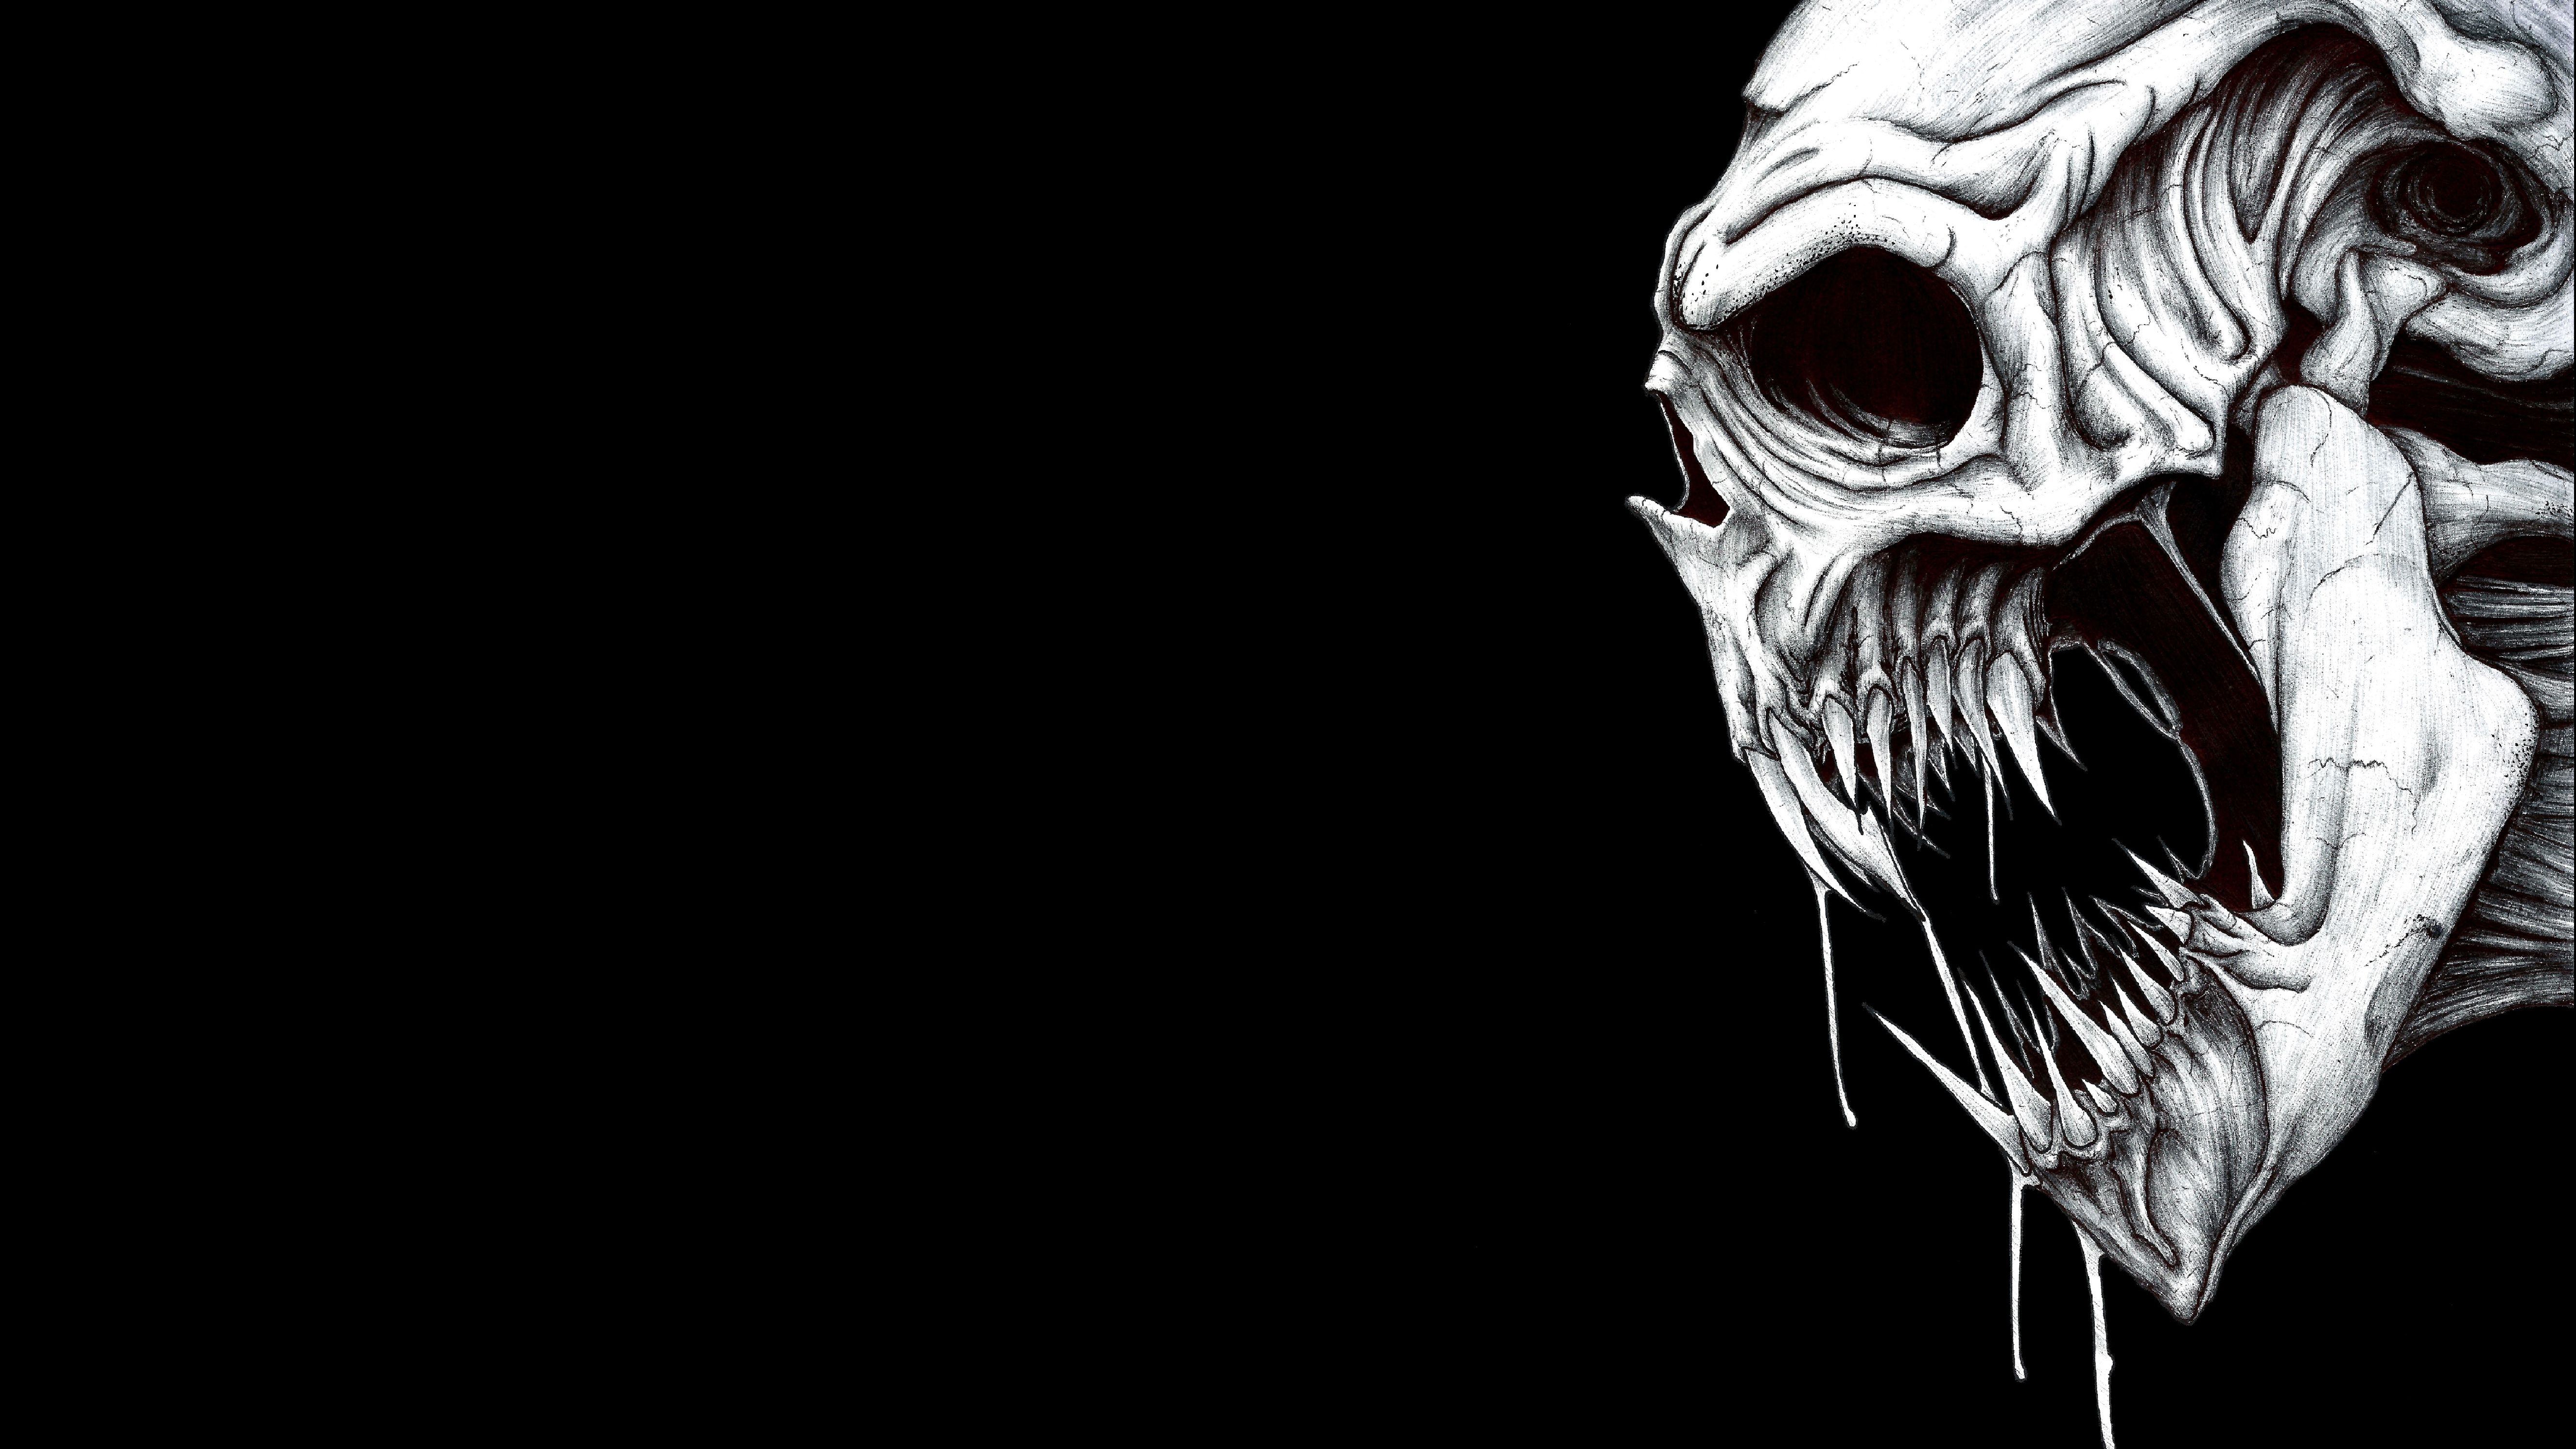 4K Ultra HD Skull Wallpaper and Background Image